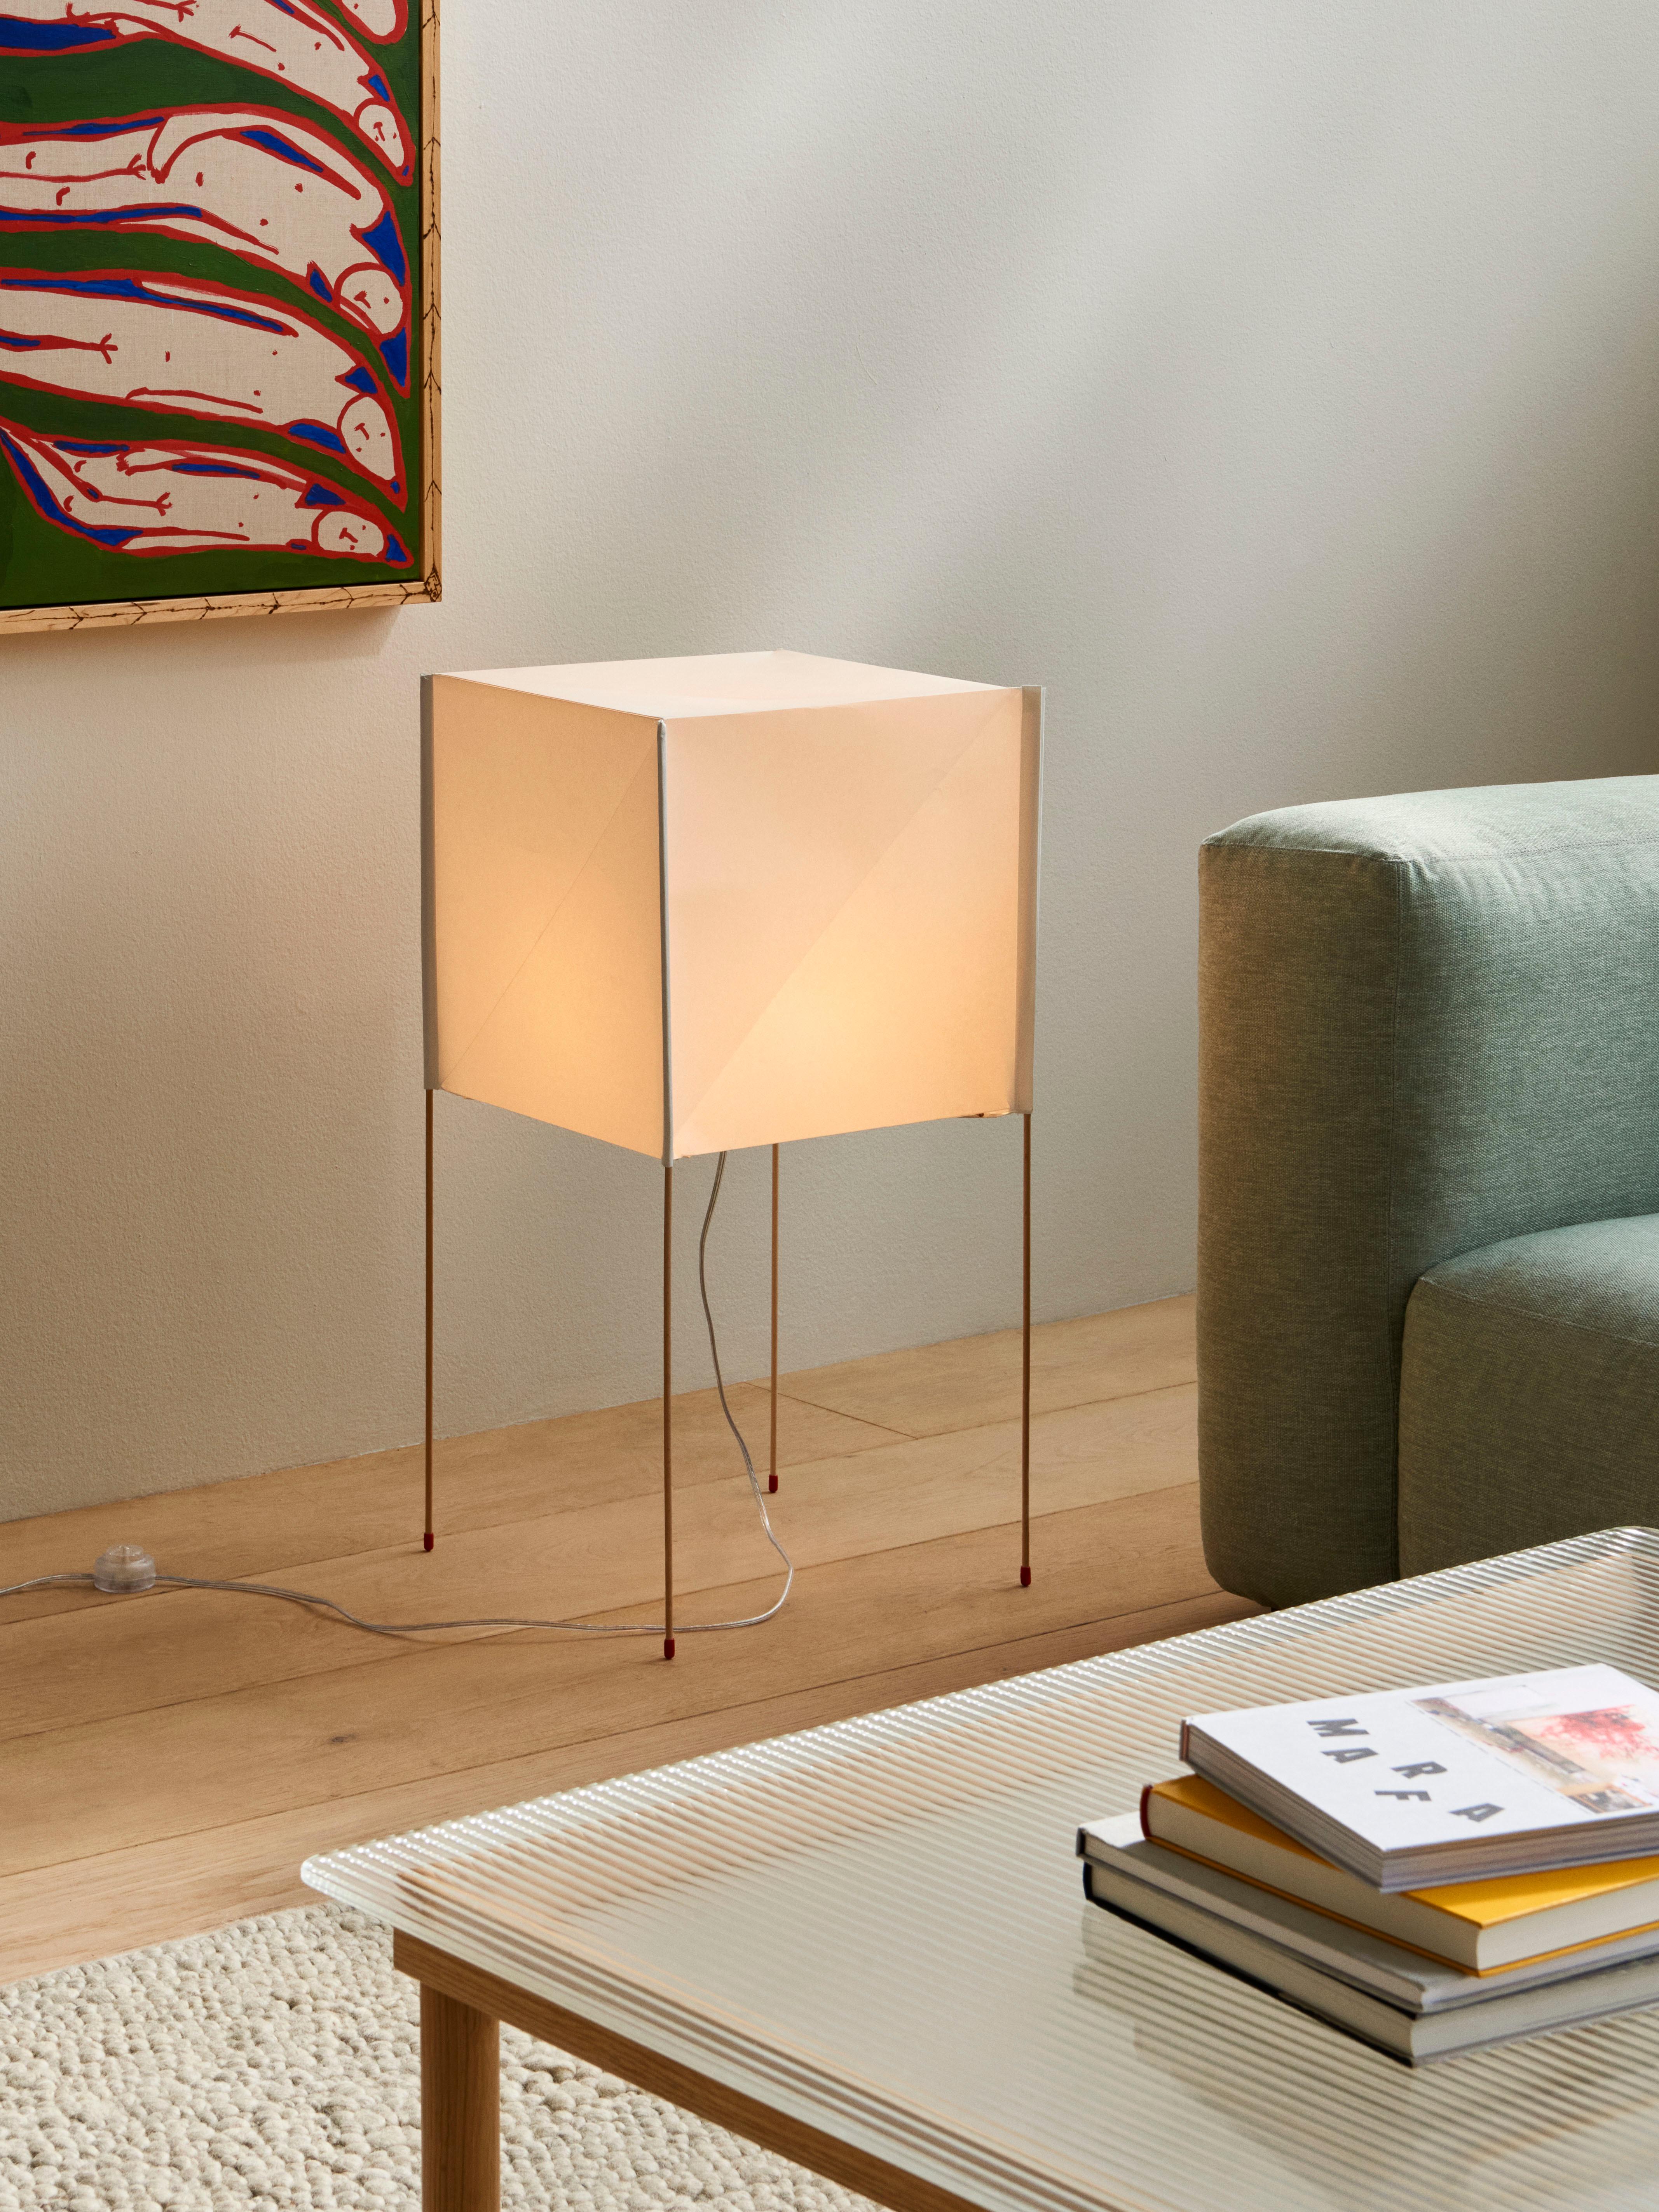 
Designed by Bertjan Pot, Paper Cube is a series of elegant and functional cubed lamps. Inspired by the mechanics of constructing folded paper ornaments, Paper Cube has a flat-pack design that is easy to assemble. Constructed from a strong Japanese